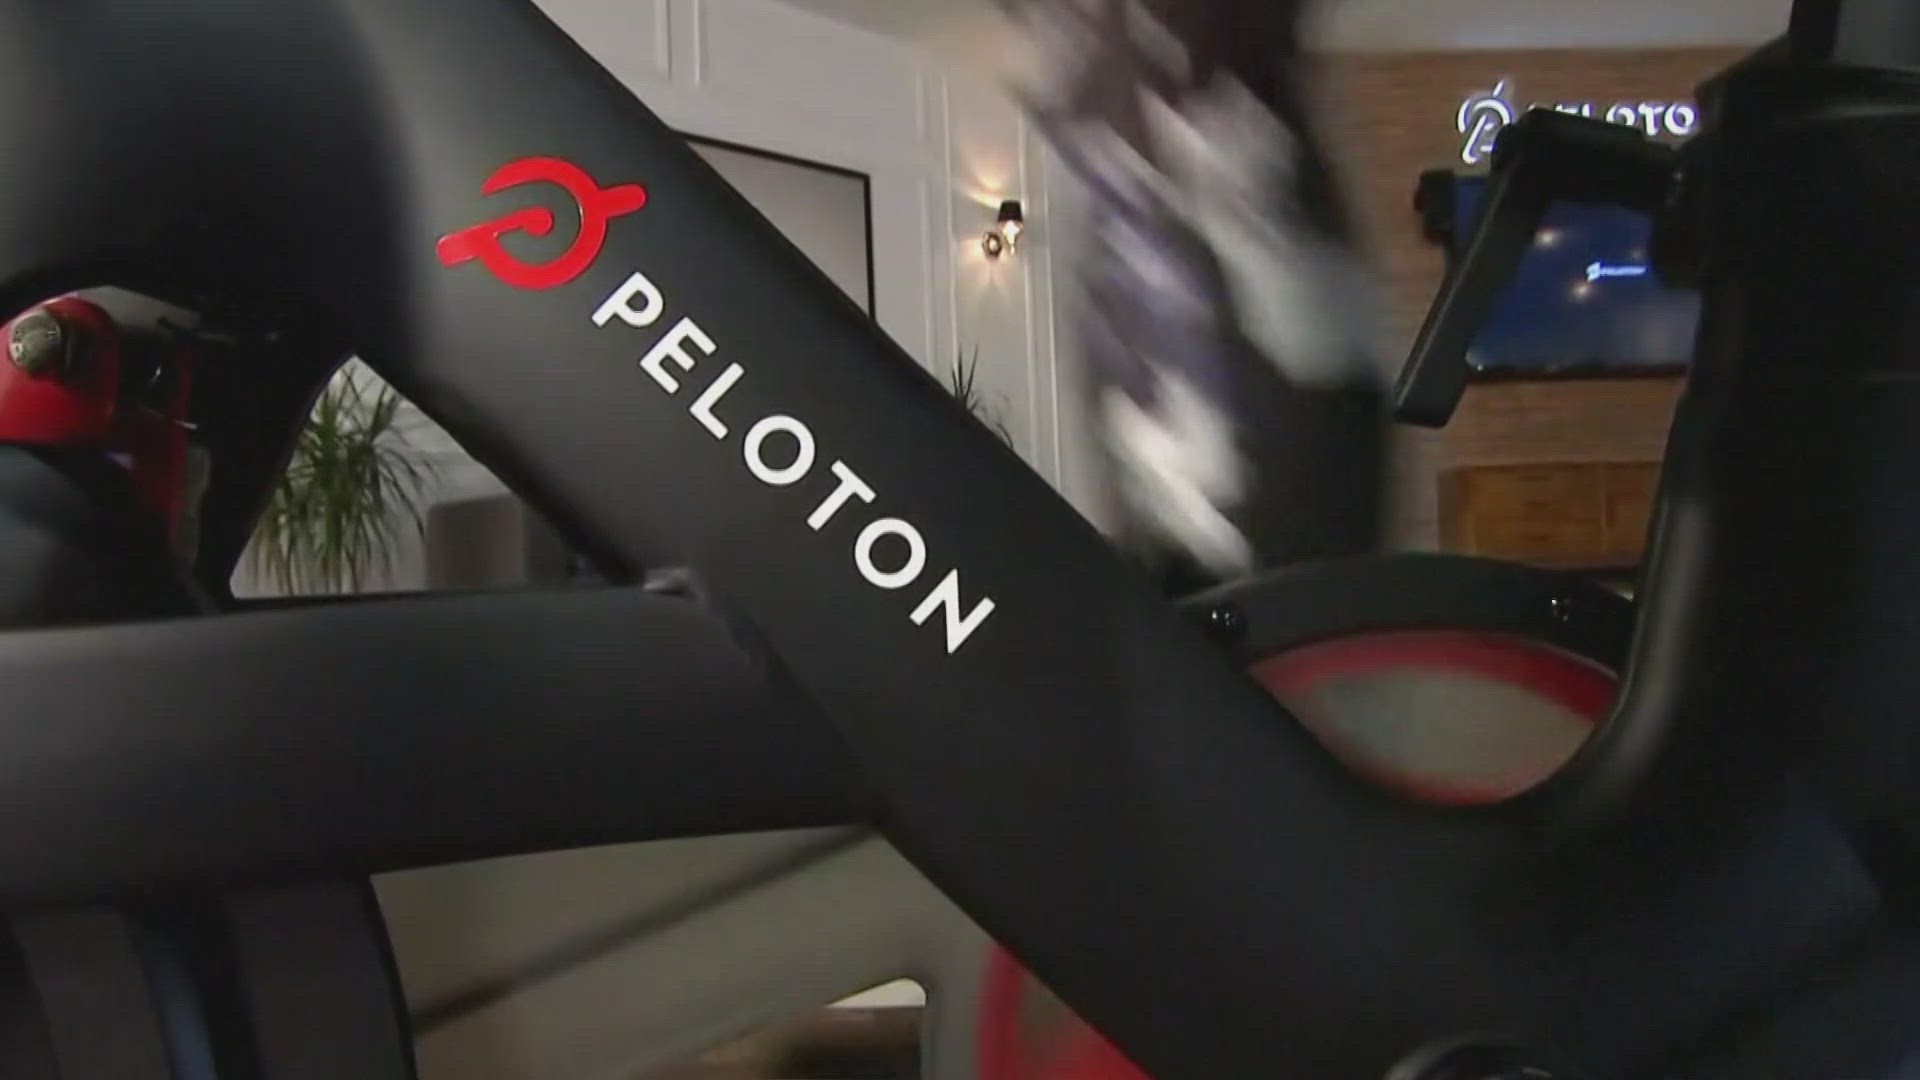 Stationary bike and treadmill maker Peloton is cutting jobs, and the company's CEO is stepping down.